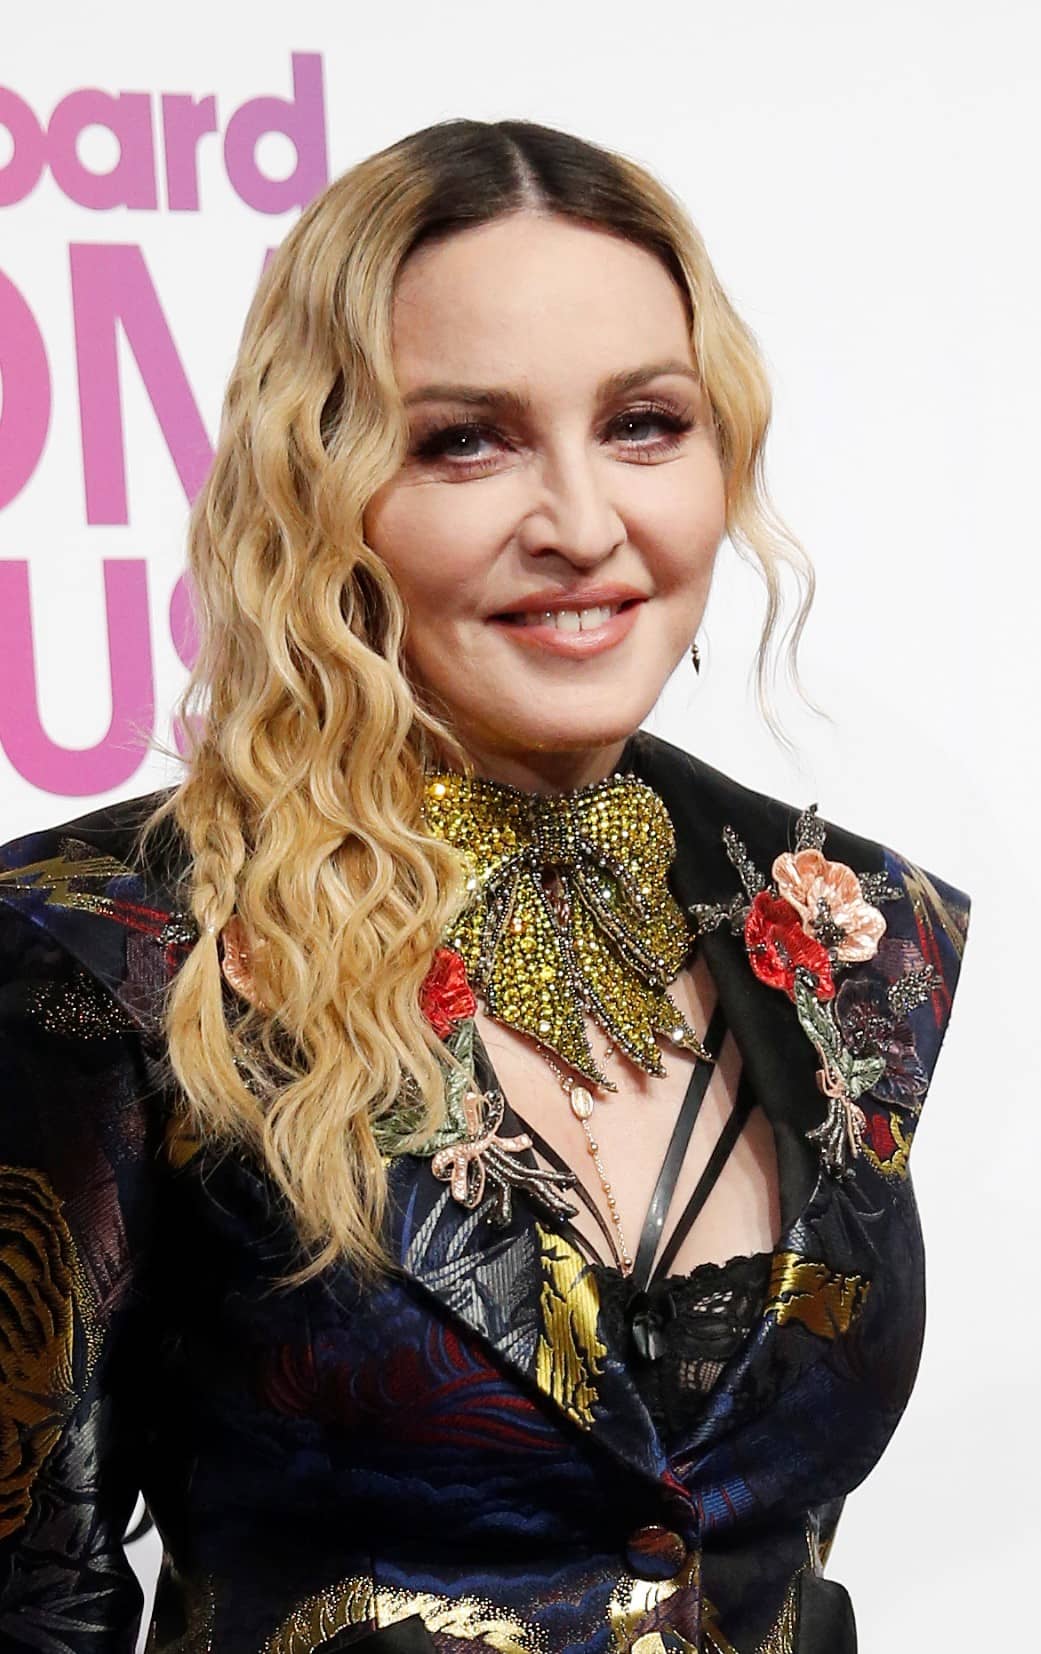 madonna-poses-on-the-red-carpet-a-the-billboard-magazines-11th-annual-women-in-music-luncheon-in-new-york-2